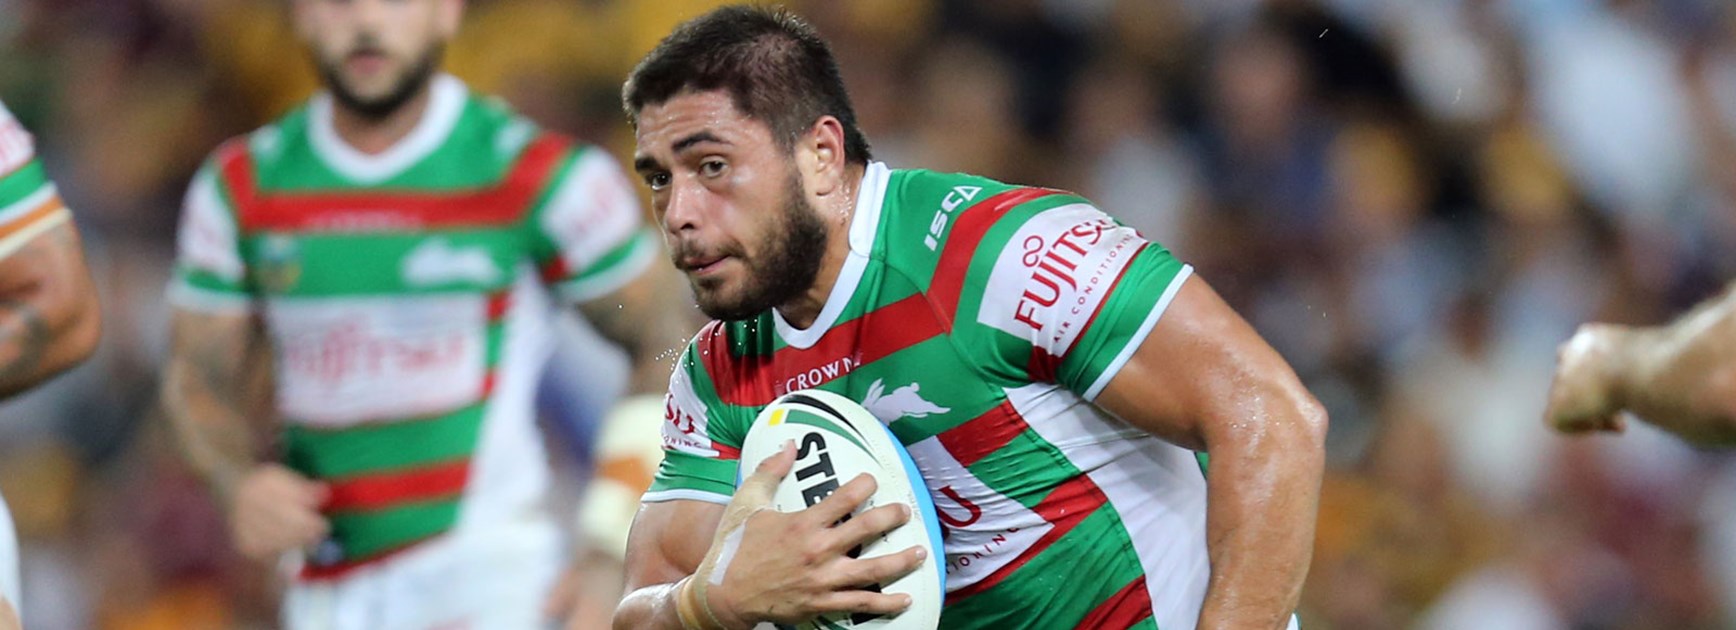 Rabbitohs forward Chris Grevsmuhl won the Auckland Nines, Charity Shield, NRL All Stars and World Club Challenge all before making his NRL debut.